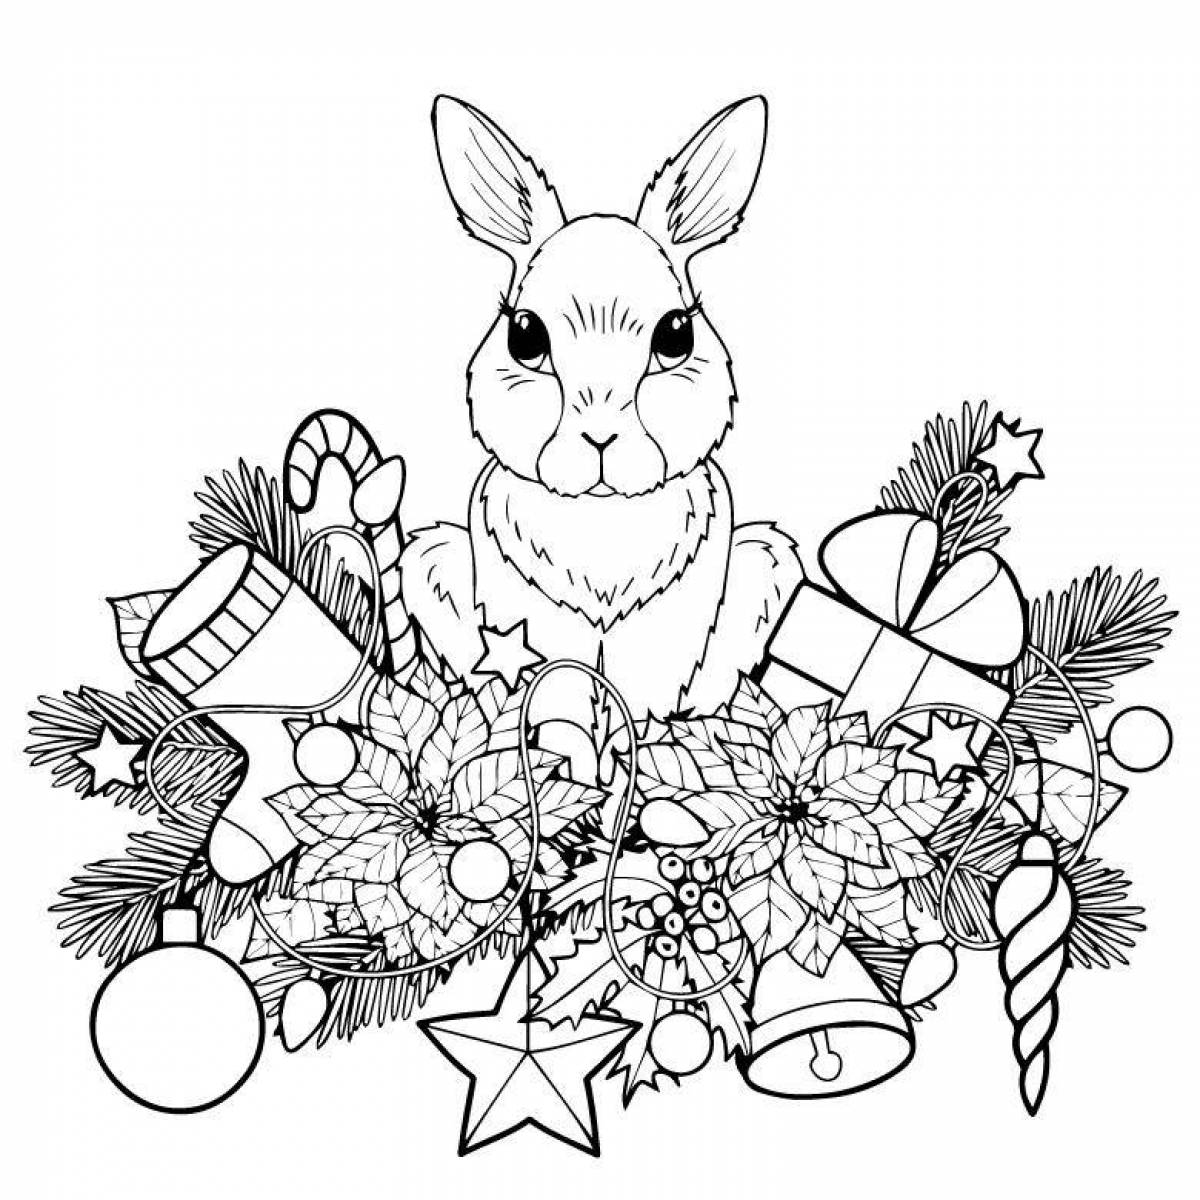 Exquisite coloring book year of the rabbit 2023